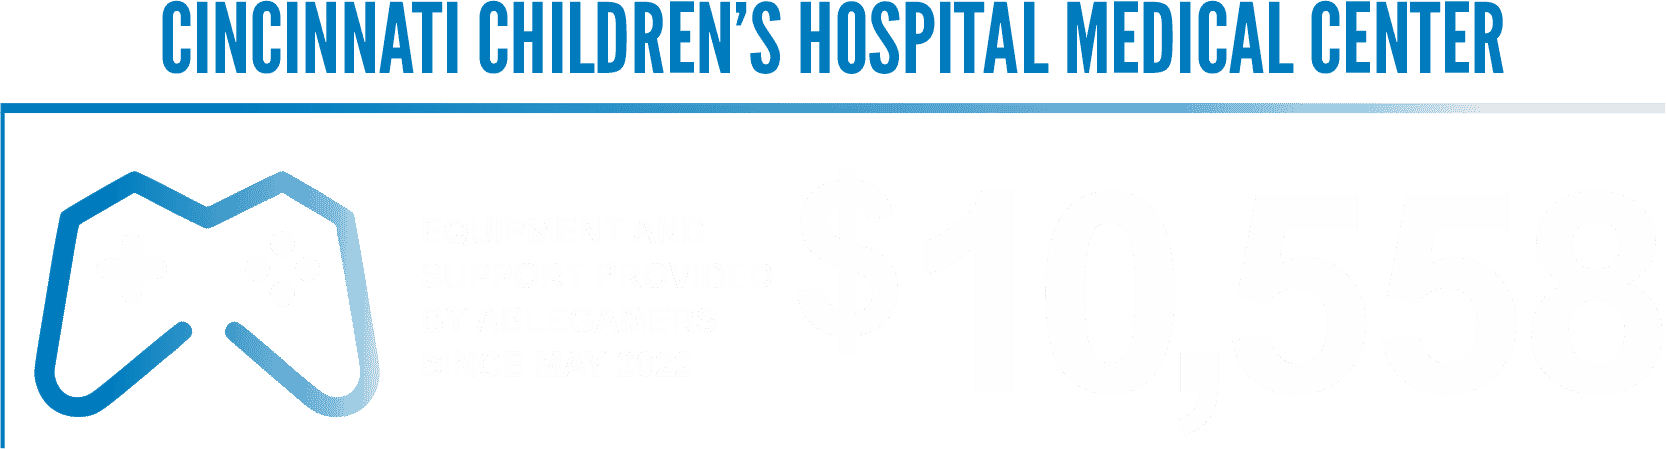 CINCINNATI CHILDREN’S HOSPITAL MEDICAL CENTER EQUIPMENT AND SUPPORT PROVIDED BY ABLEGAMERS SINCE MAY 2022 $10,558